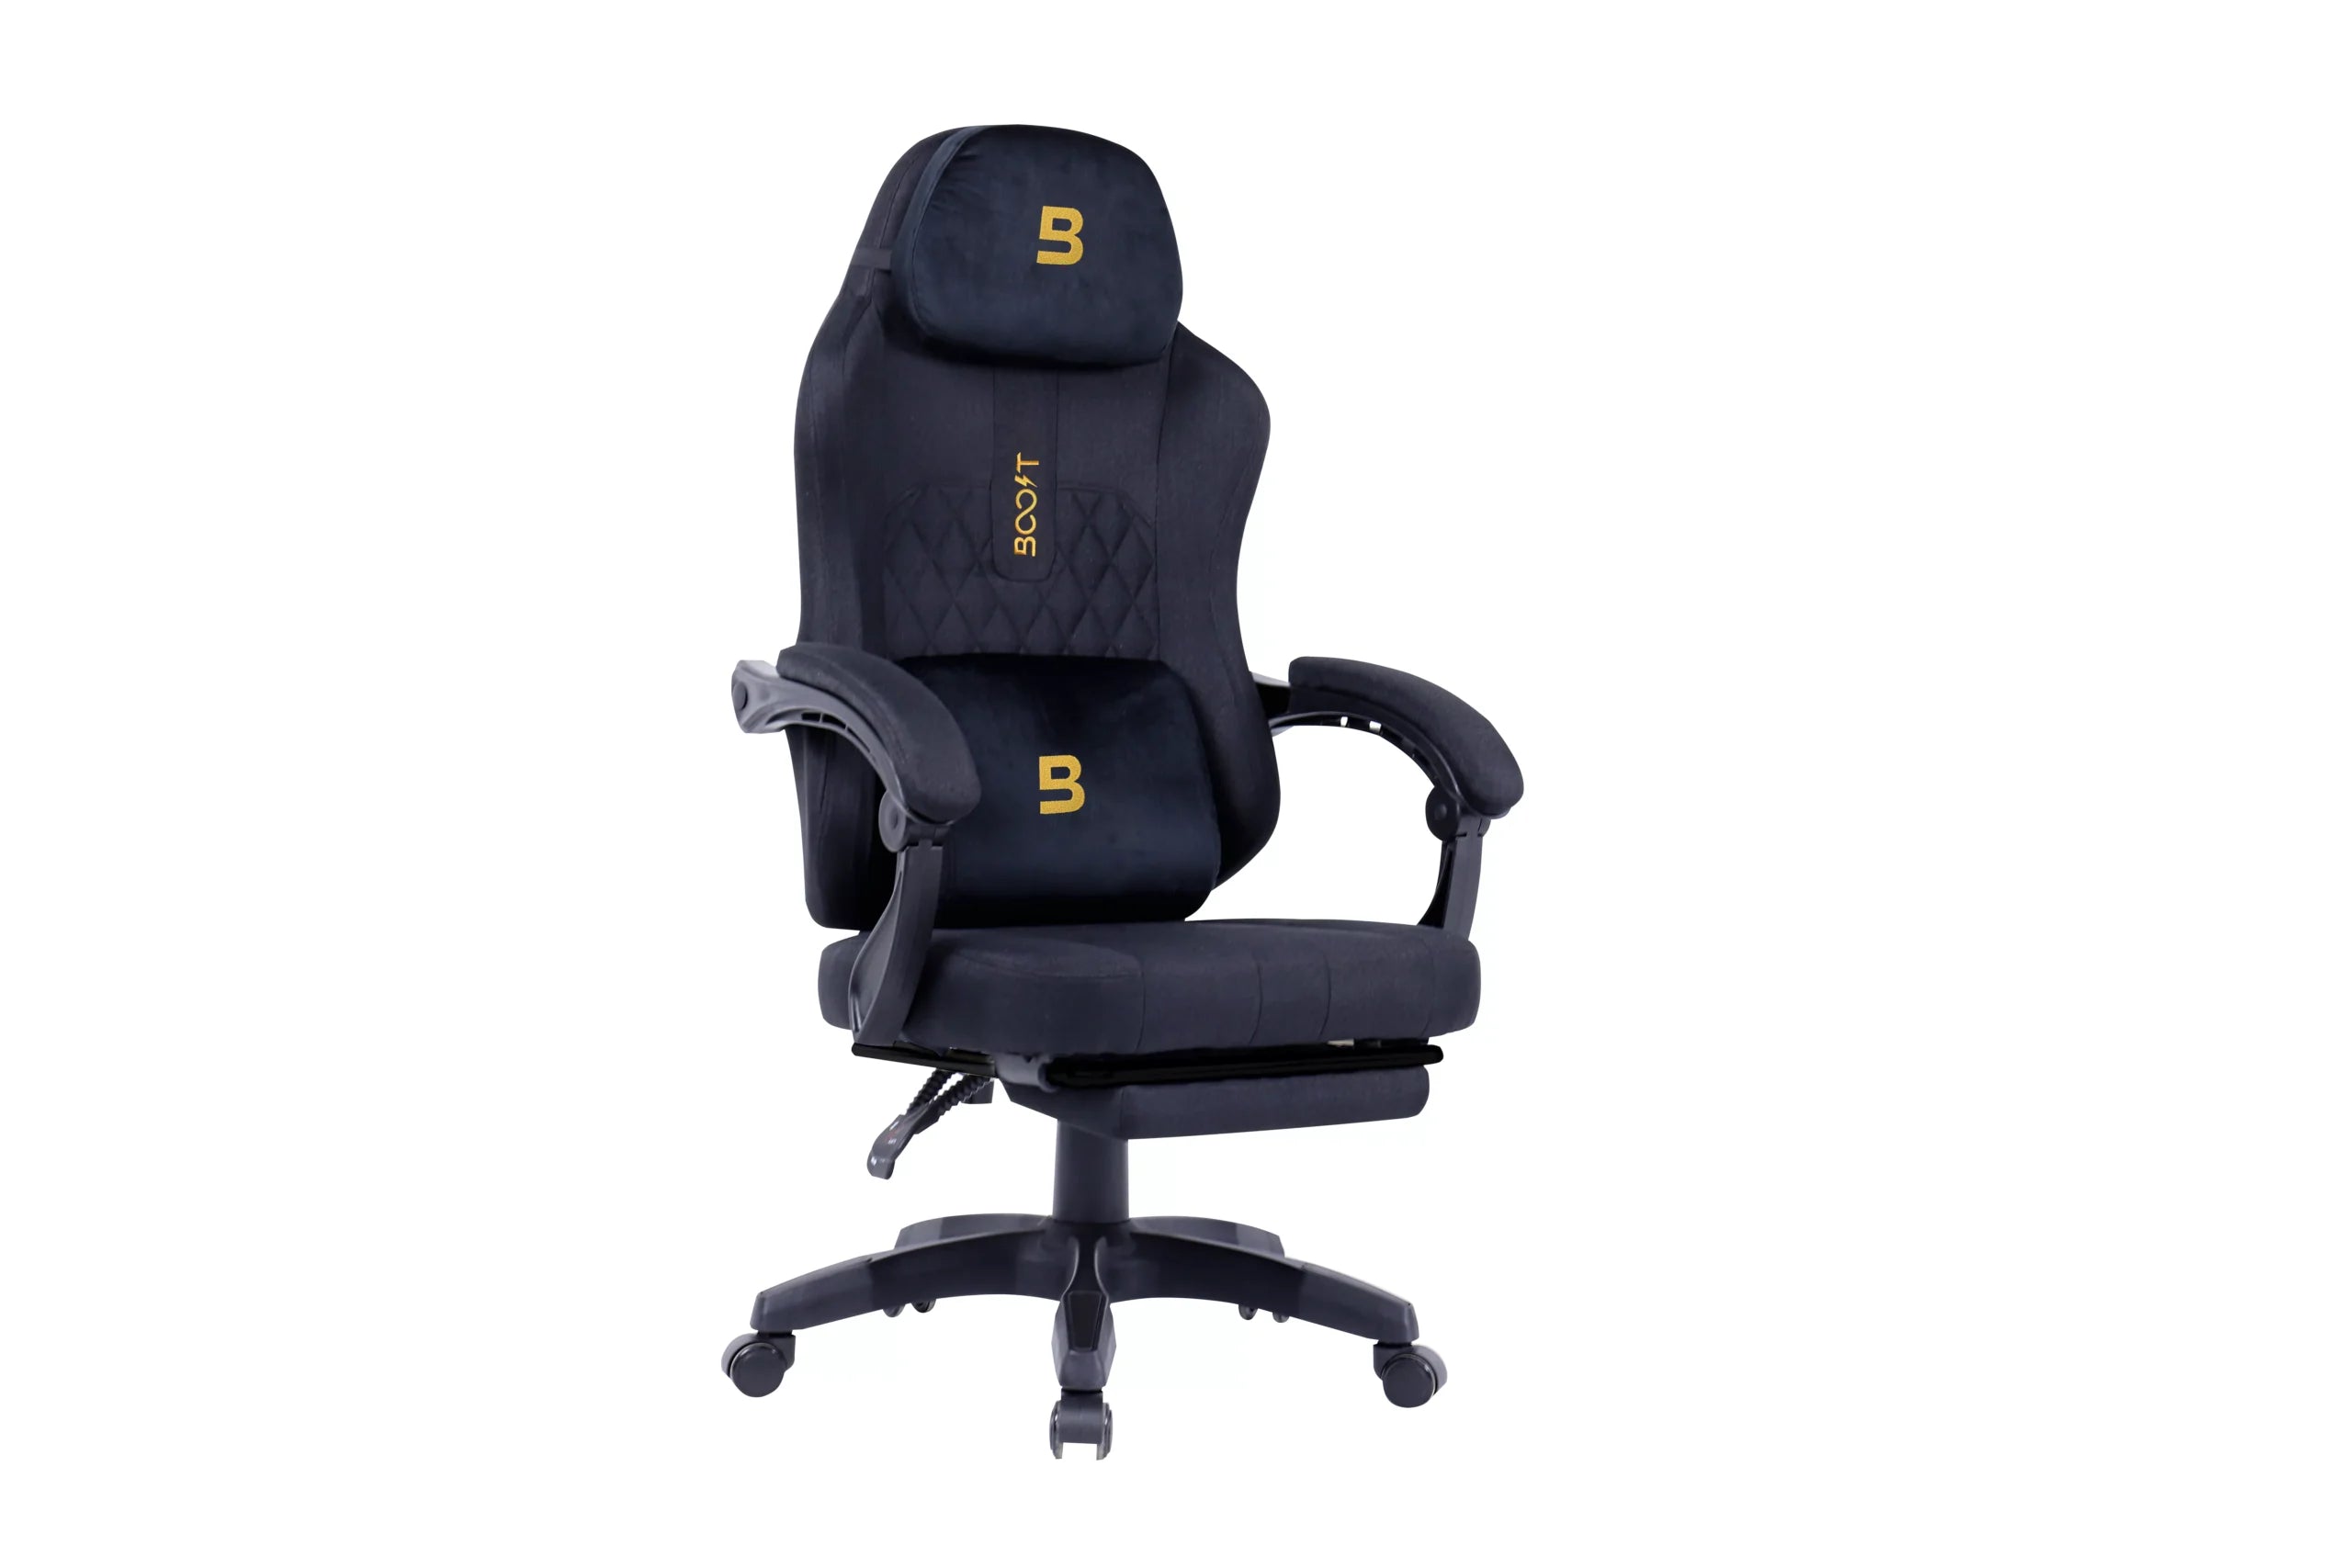 Boost Surge Pro Ergonomic Chair With Footrest-3